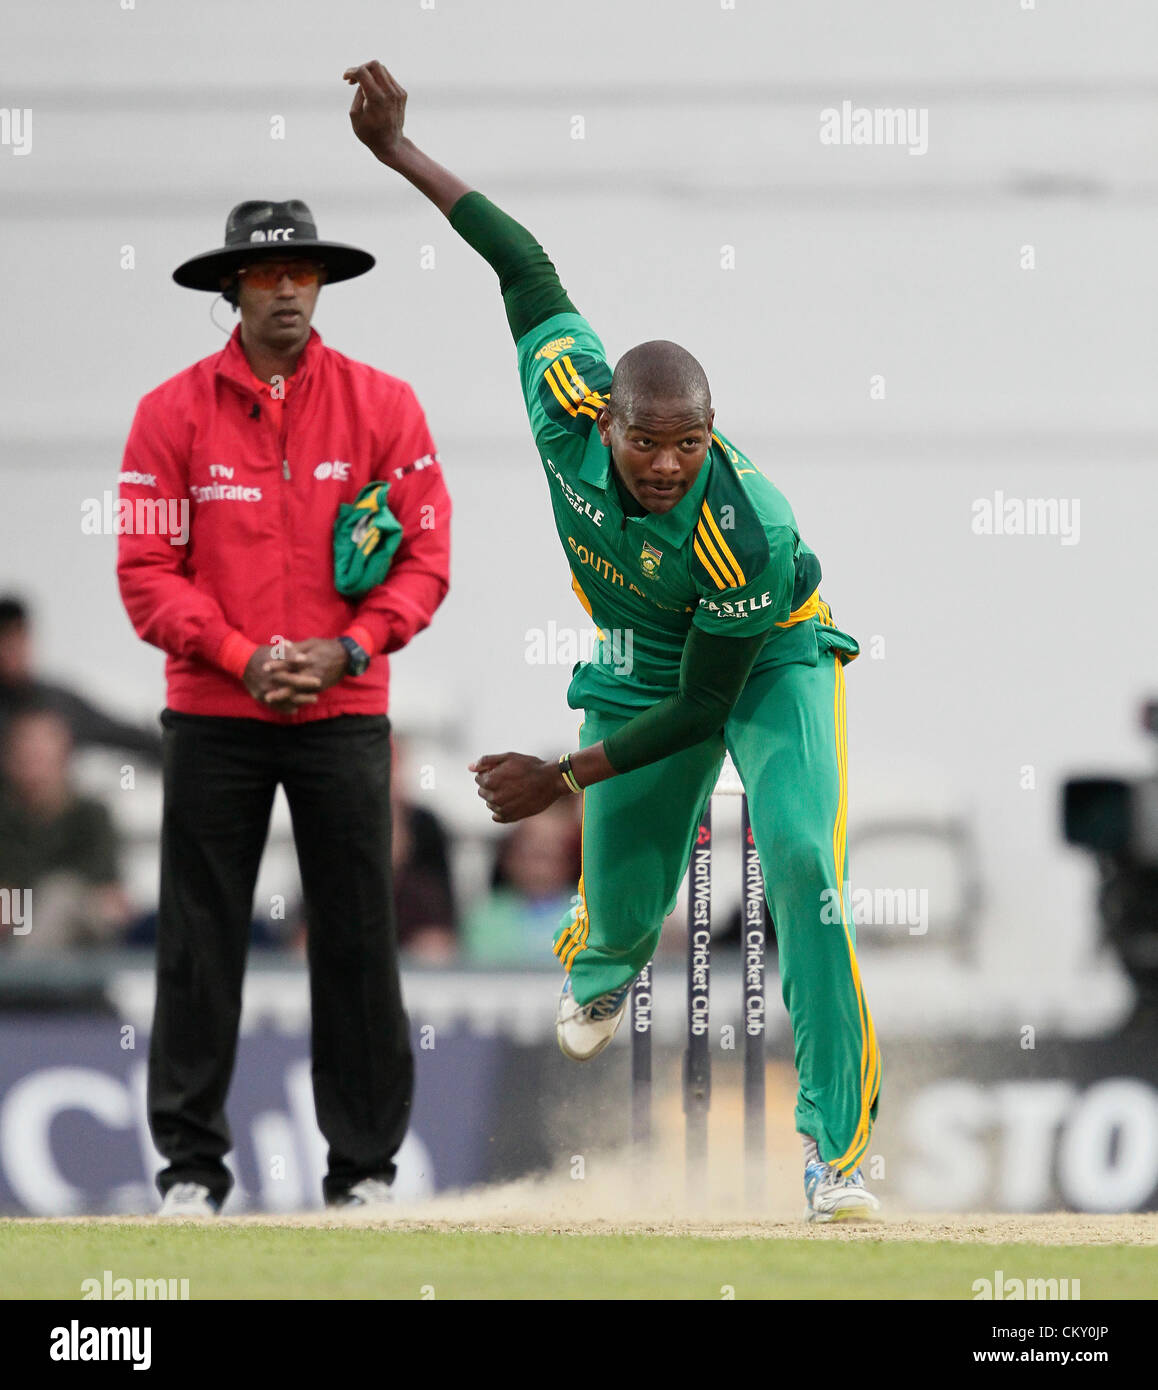 31.08.2012. London England Lonwabo Tsotsobe in bowling action during the England v South Africa: 3rd Natwest ODI at The Kia Oval Cricket Ground Kennington London England. England chasing 212 to win this ODI Stock Photo